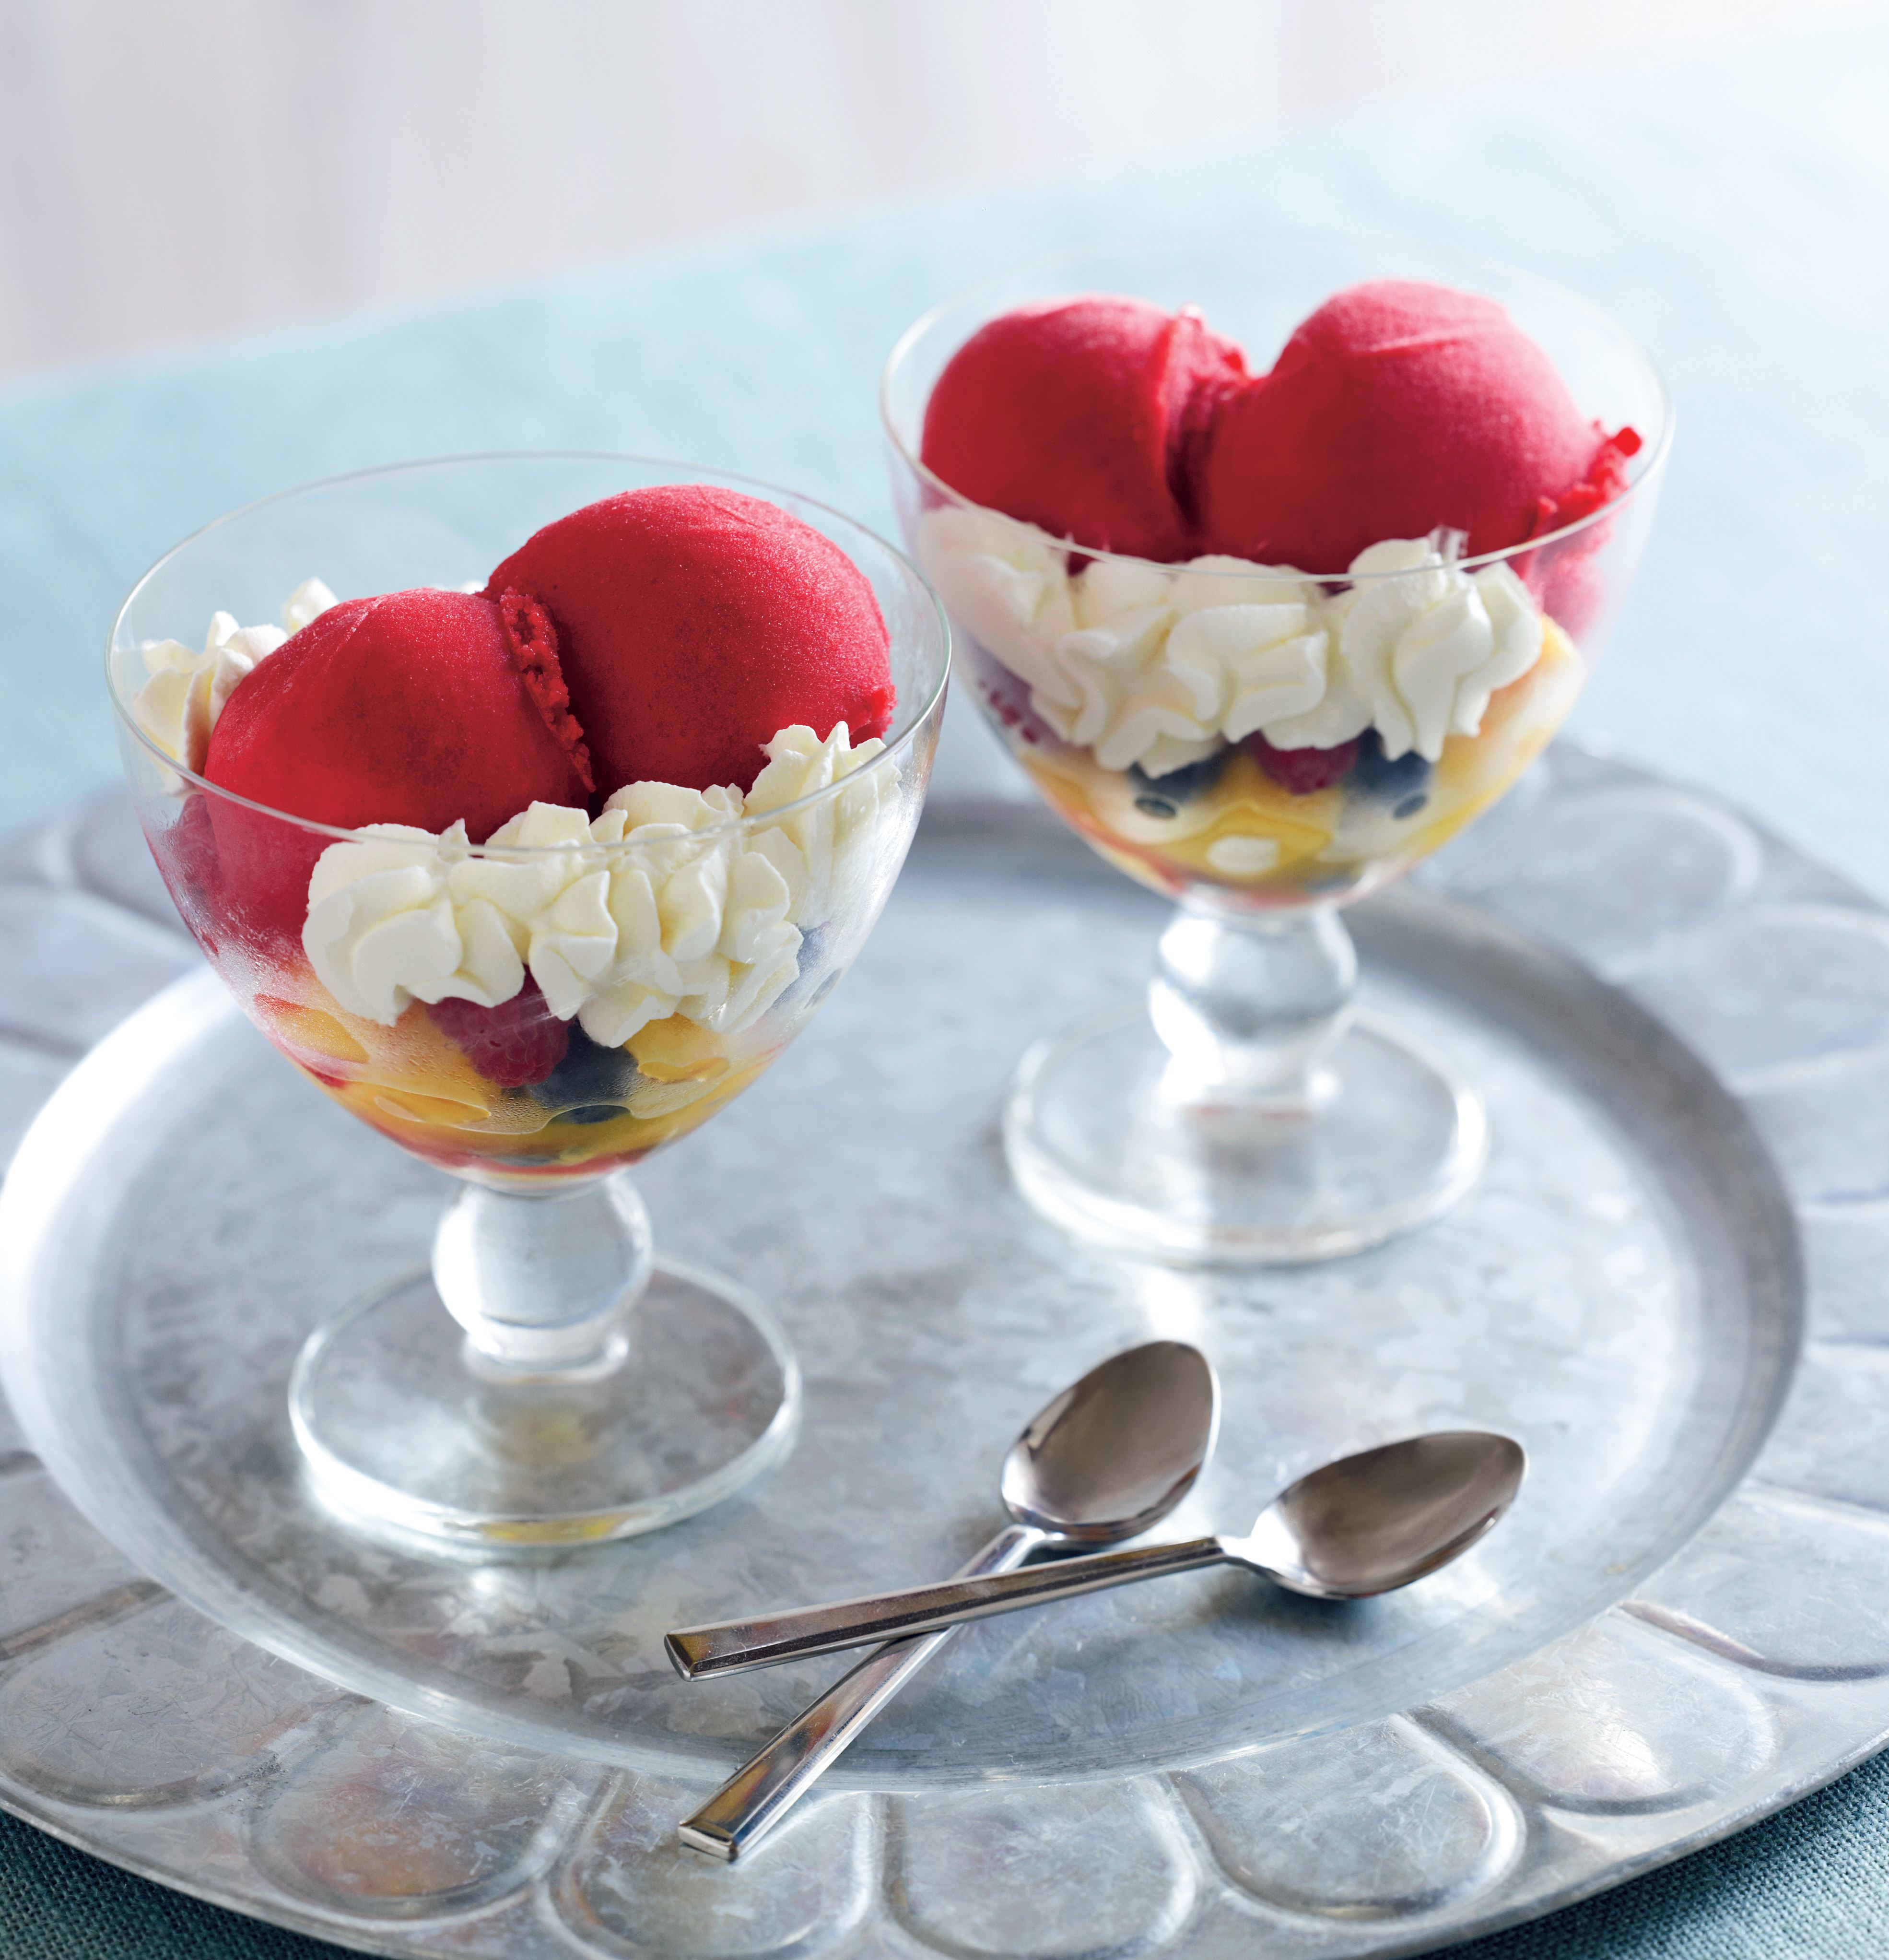 Raspberry sorbet in a fruit coupe